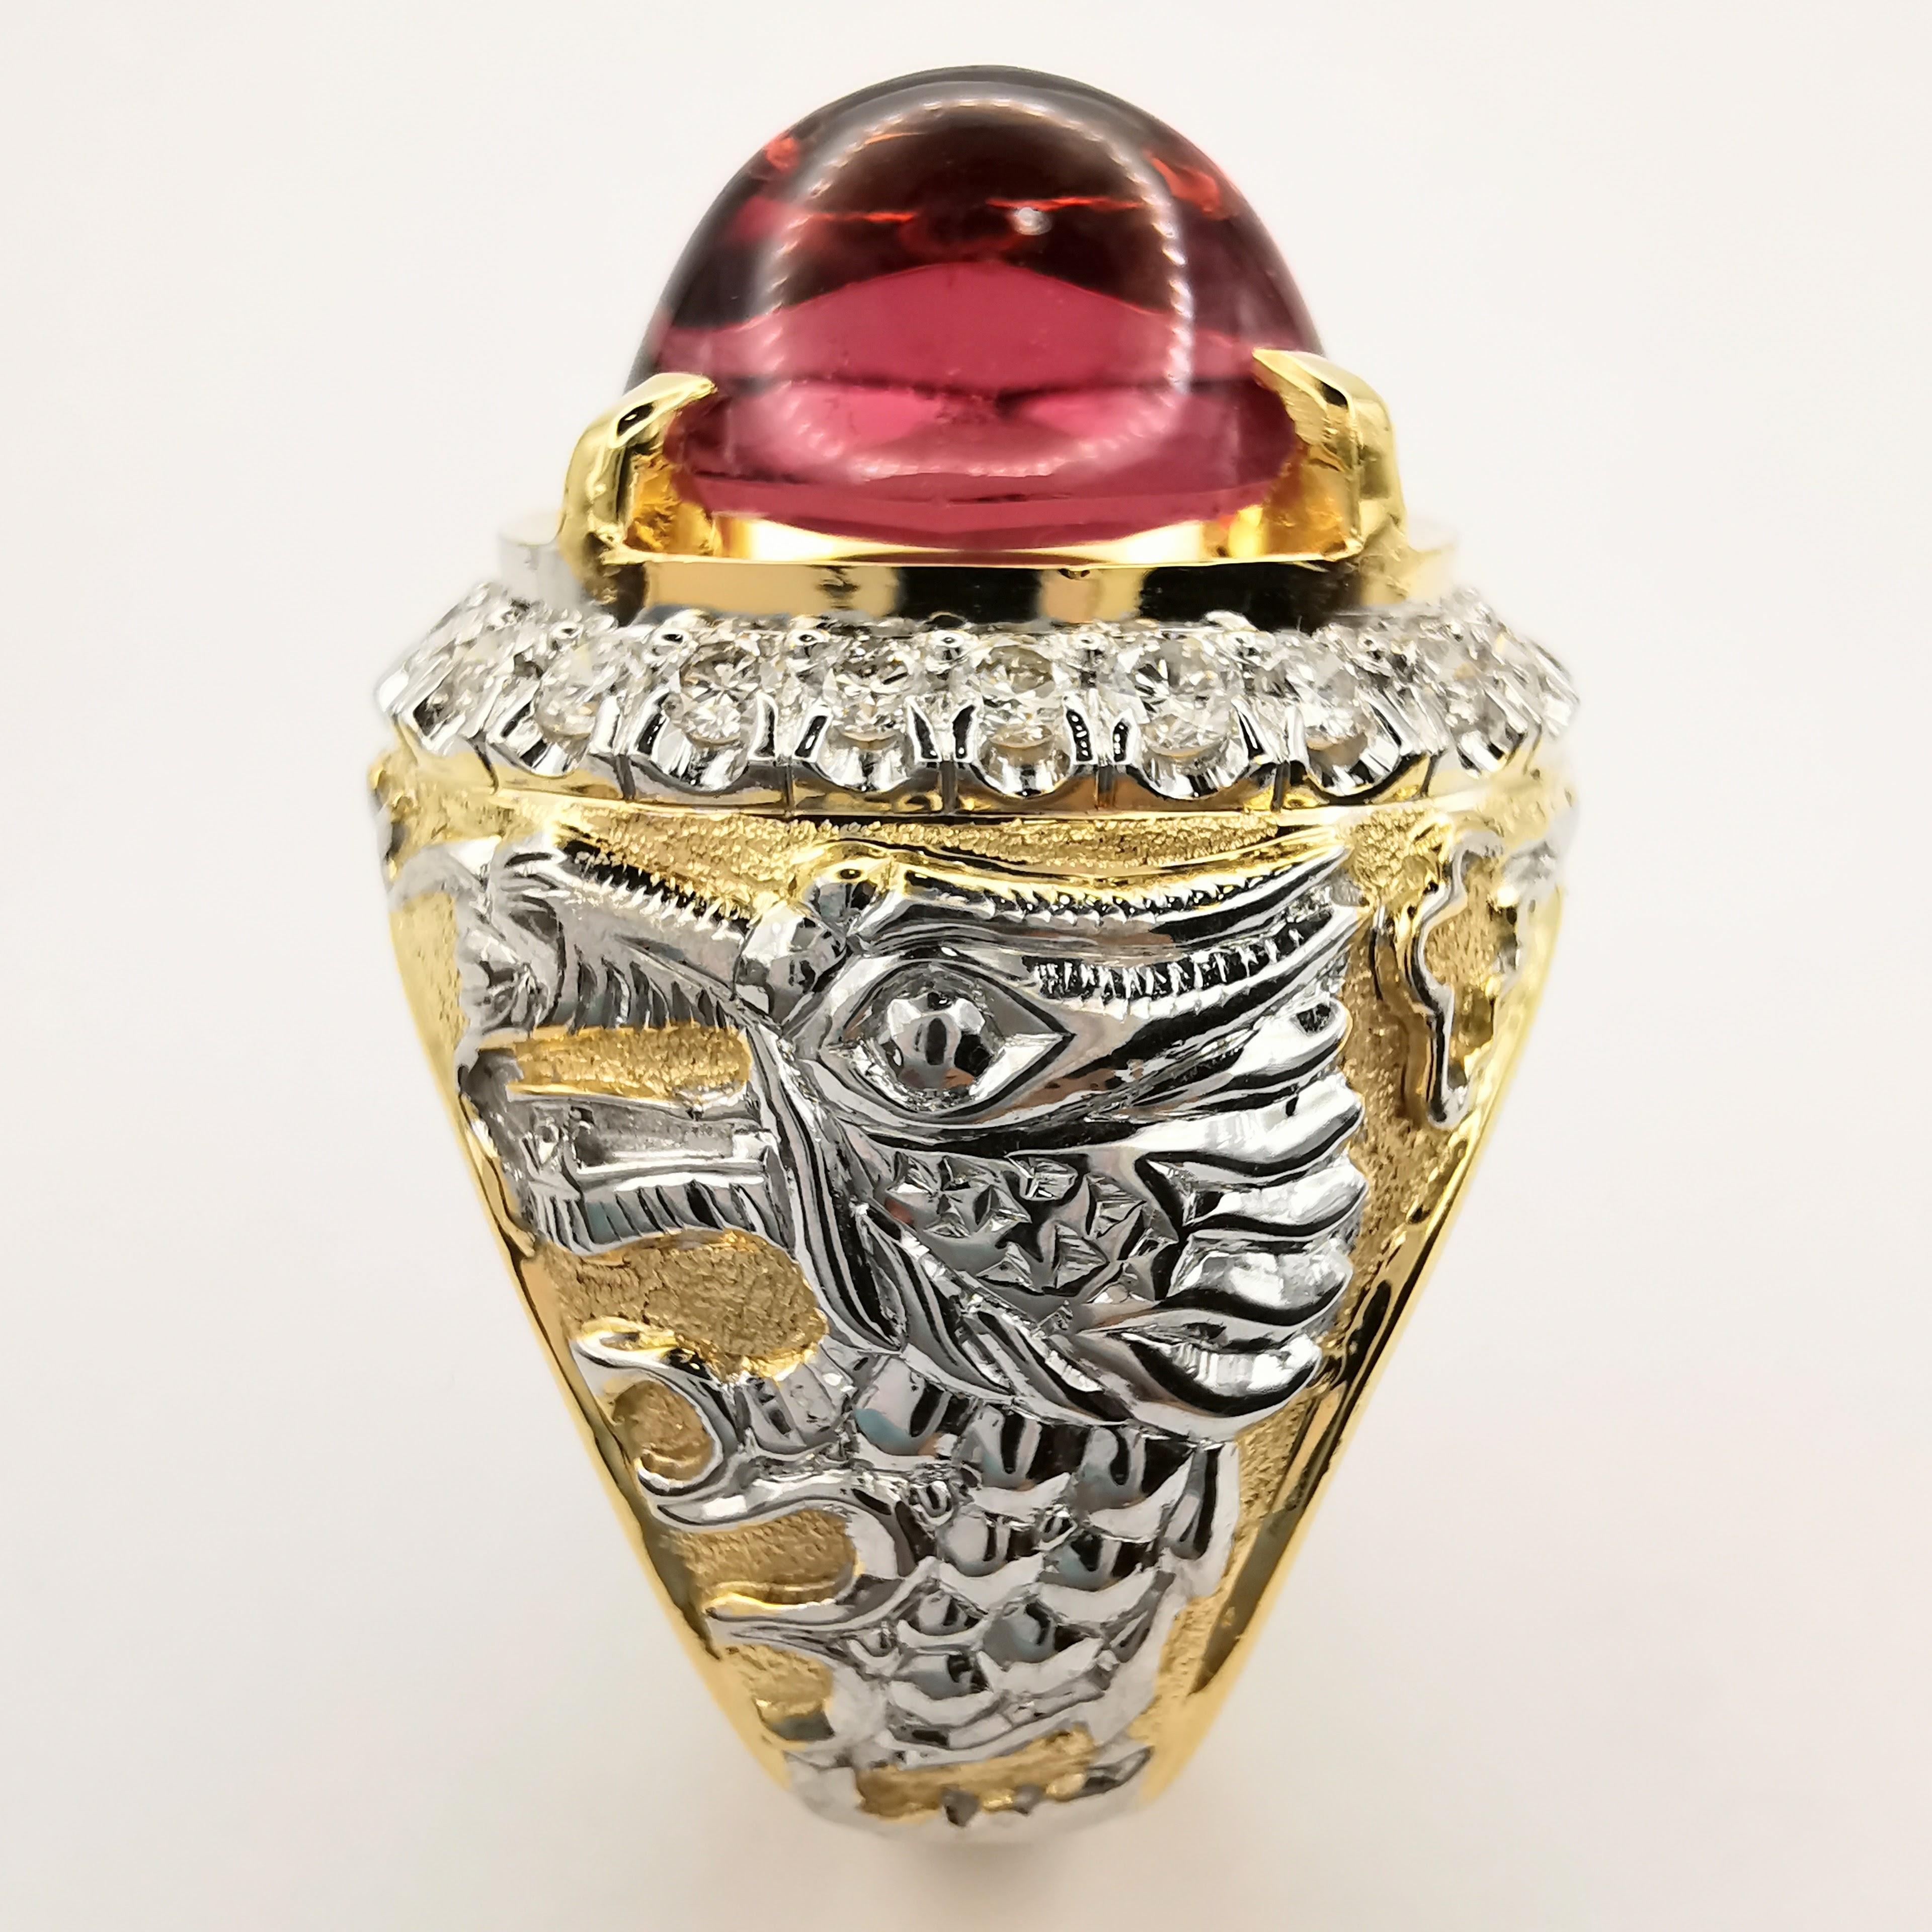 Vintage Dragon 10.2ct Cabochon Pink Tourmaline Diamond Men's Ring in 18K Gold For Sale 2